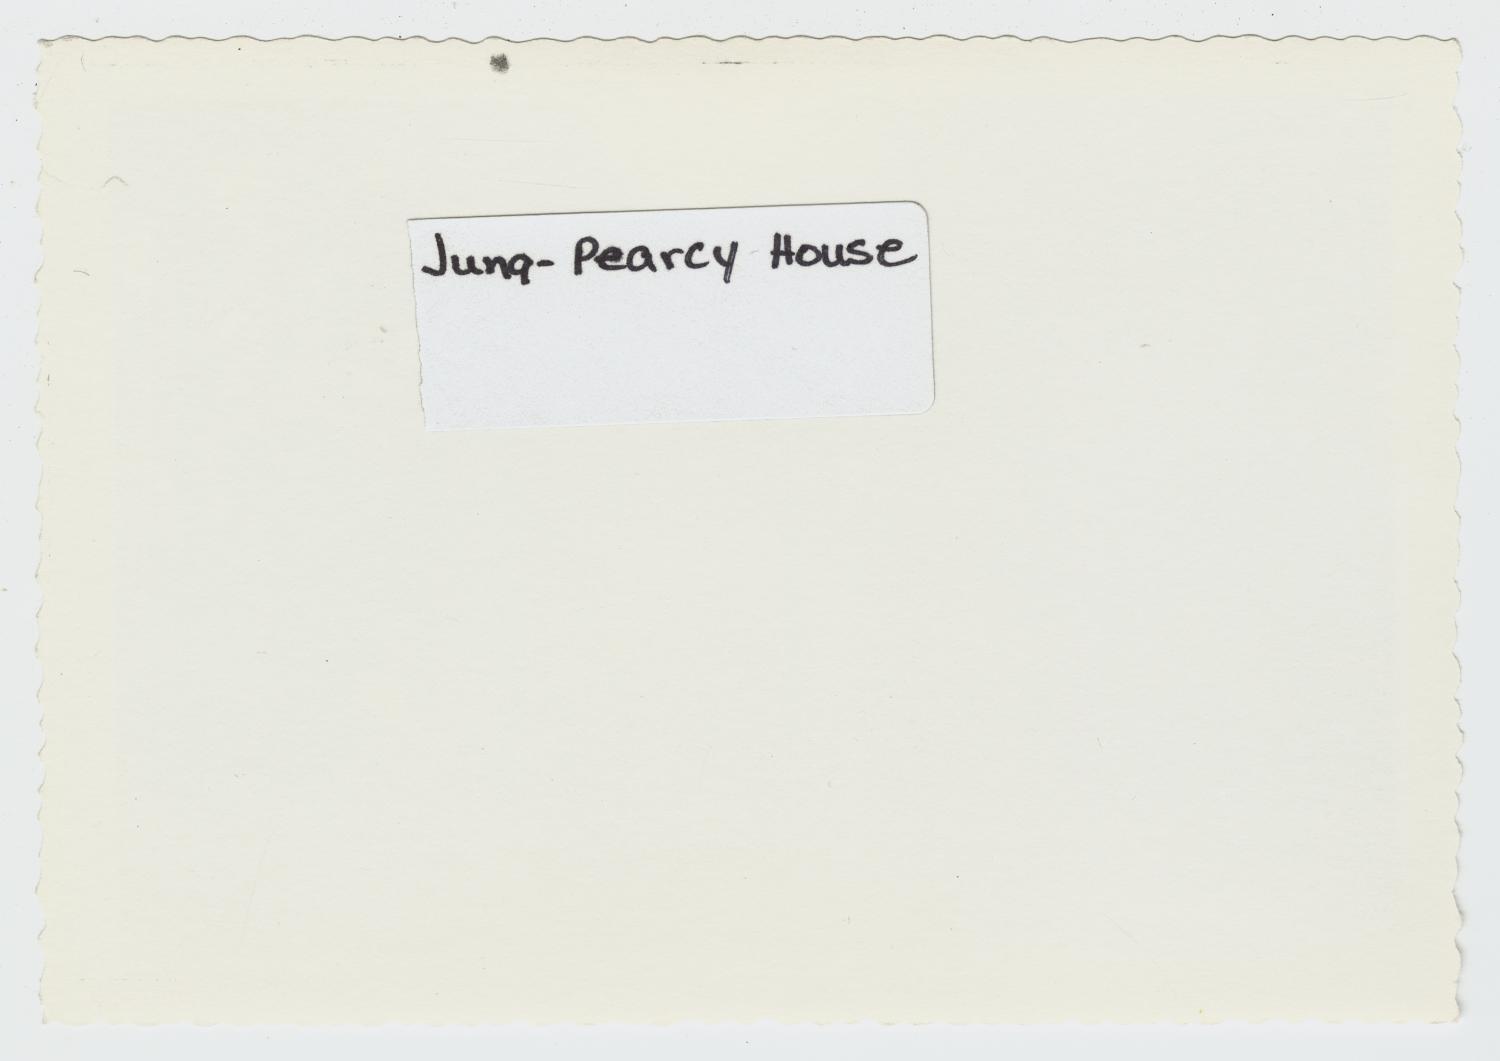 [Jung-Pearcy House Photograph #1]
                                                
                                                    [Sequence #]: 2 of 2
                                                